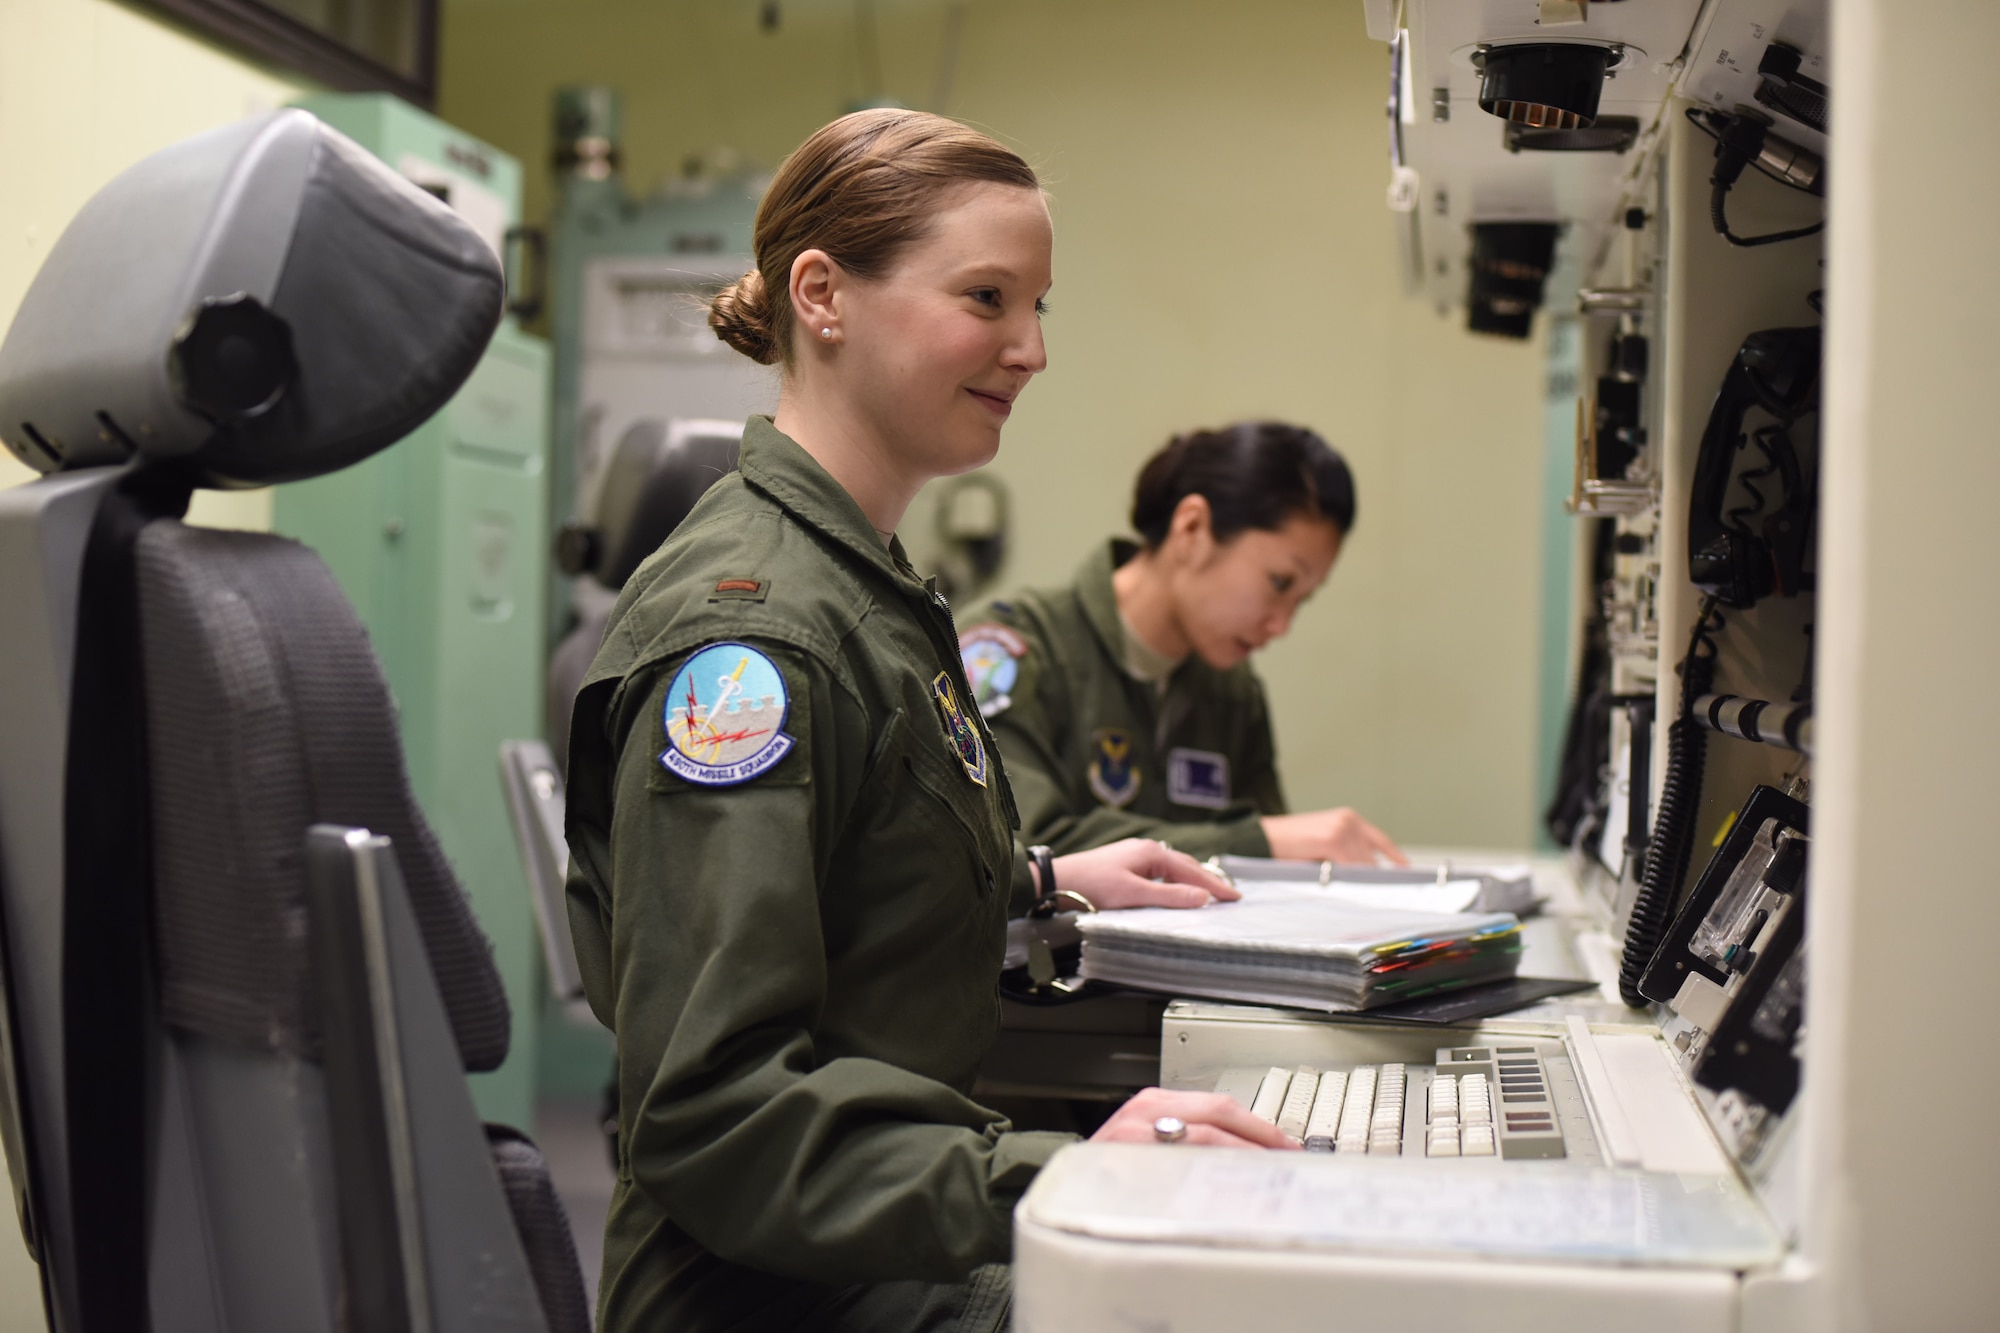 Second Lt. Alexandra Rea, the 490th Missile Squadron combat crew deputy director, left, and 1st Lt. Elizabeth Guidara, the 12th Missile Squadron combat crew deputy director, perform training at the Malmstrom Air Force Base, Mont., missile procedures trainer March 21, 2016. In honor of Women’s History Month, 90 female missileers based out of Minot Air Force Base, N.D., F.E. Warren AFB, Wyo., and Malmstrom AFB completed a 24-hour alert. In addition, B-52 Stratofortress aircrews from Minot AFB and Barksdale AFB, La., participated by fielding all-female flight crews. (U.S. Air Force photo/Airman Collin Schmidt)